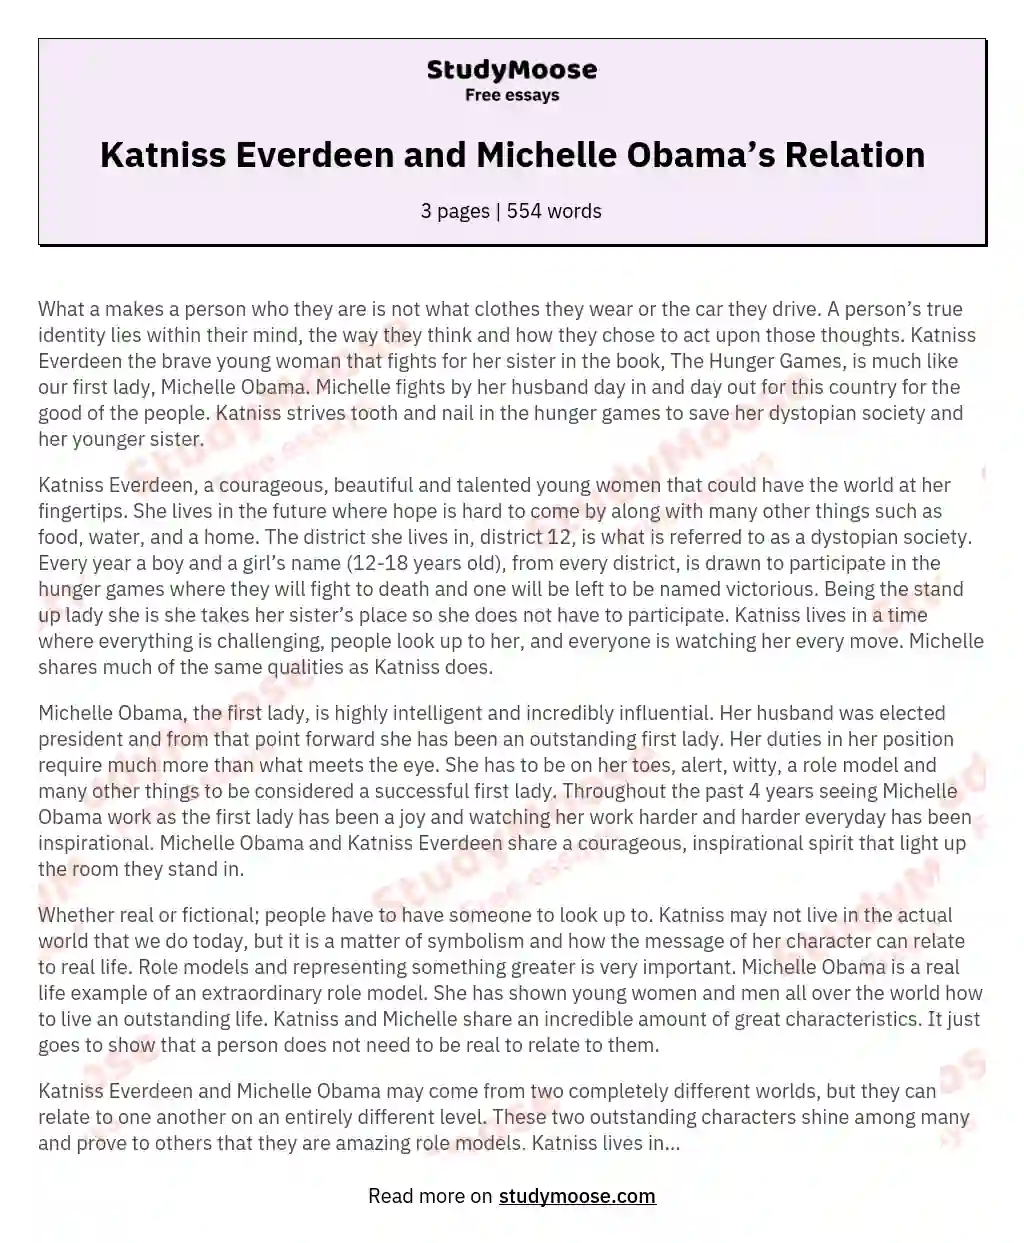 Katniss Everdeen and Michelle Obama’s Relation essay